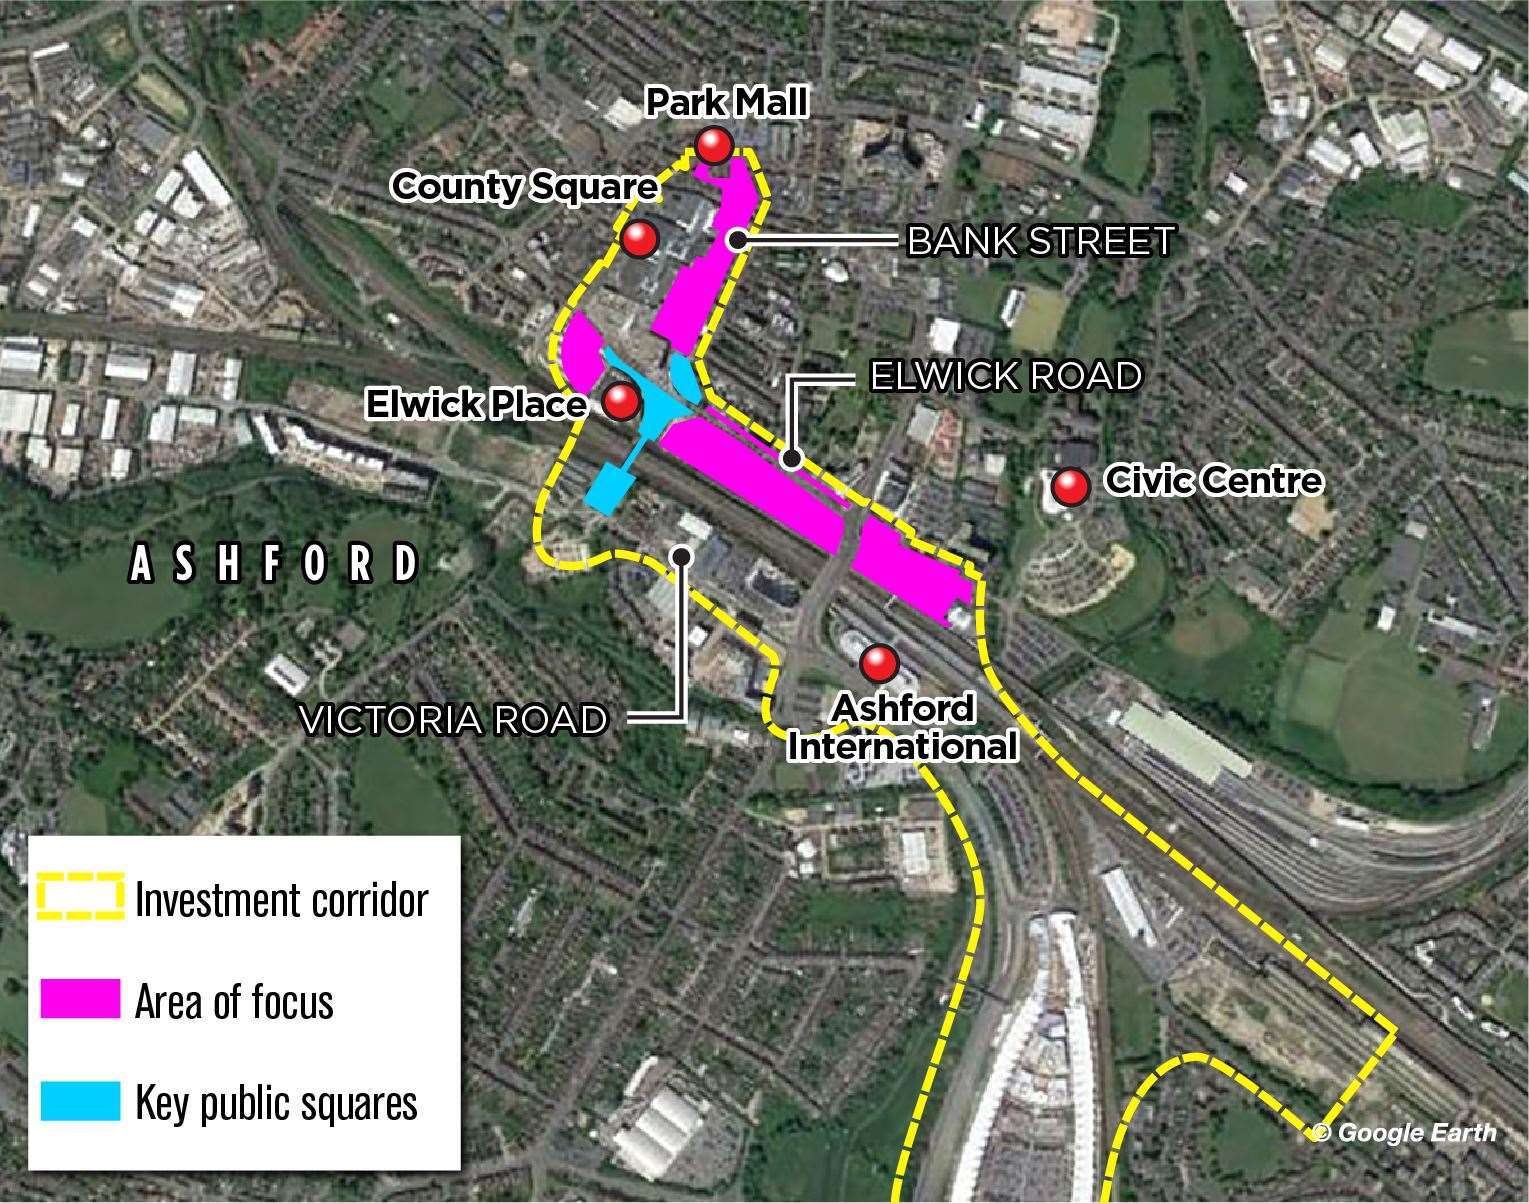 This map shows the planned 'investment corridor' in Ashford